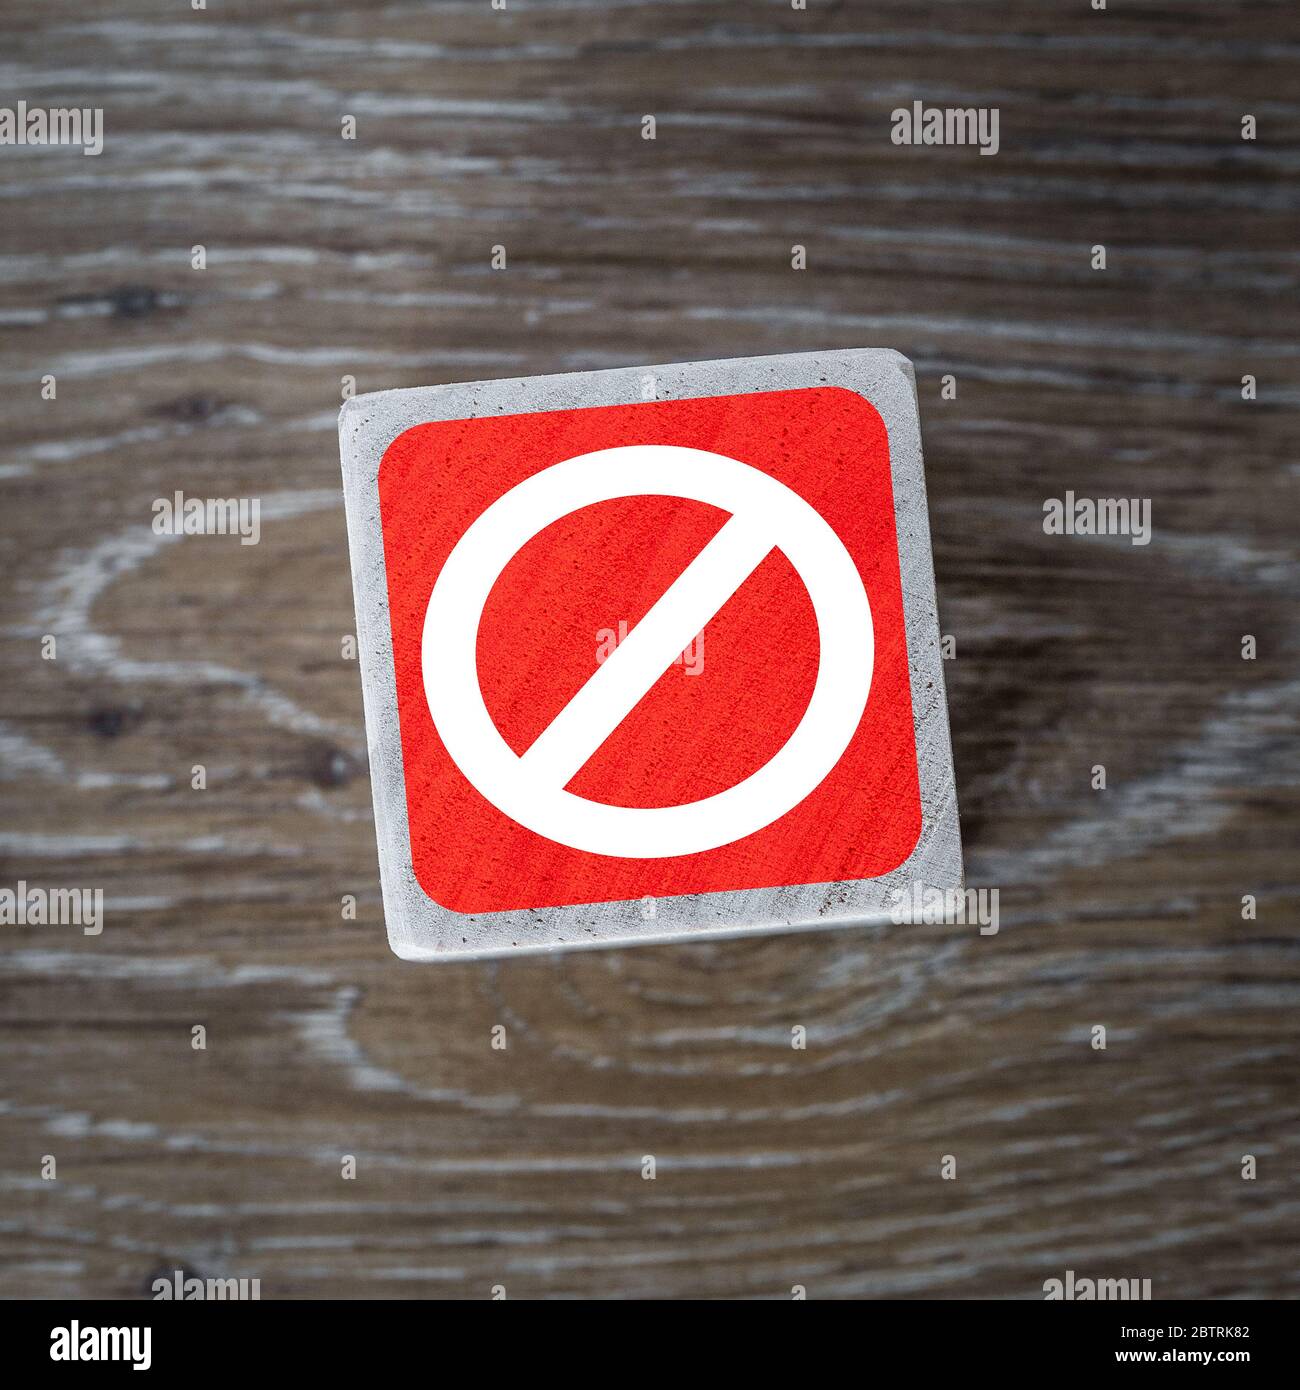 A red stop sign, symbol or icon on a wooden block and wood background with copy space Stock Photo